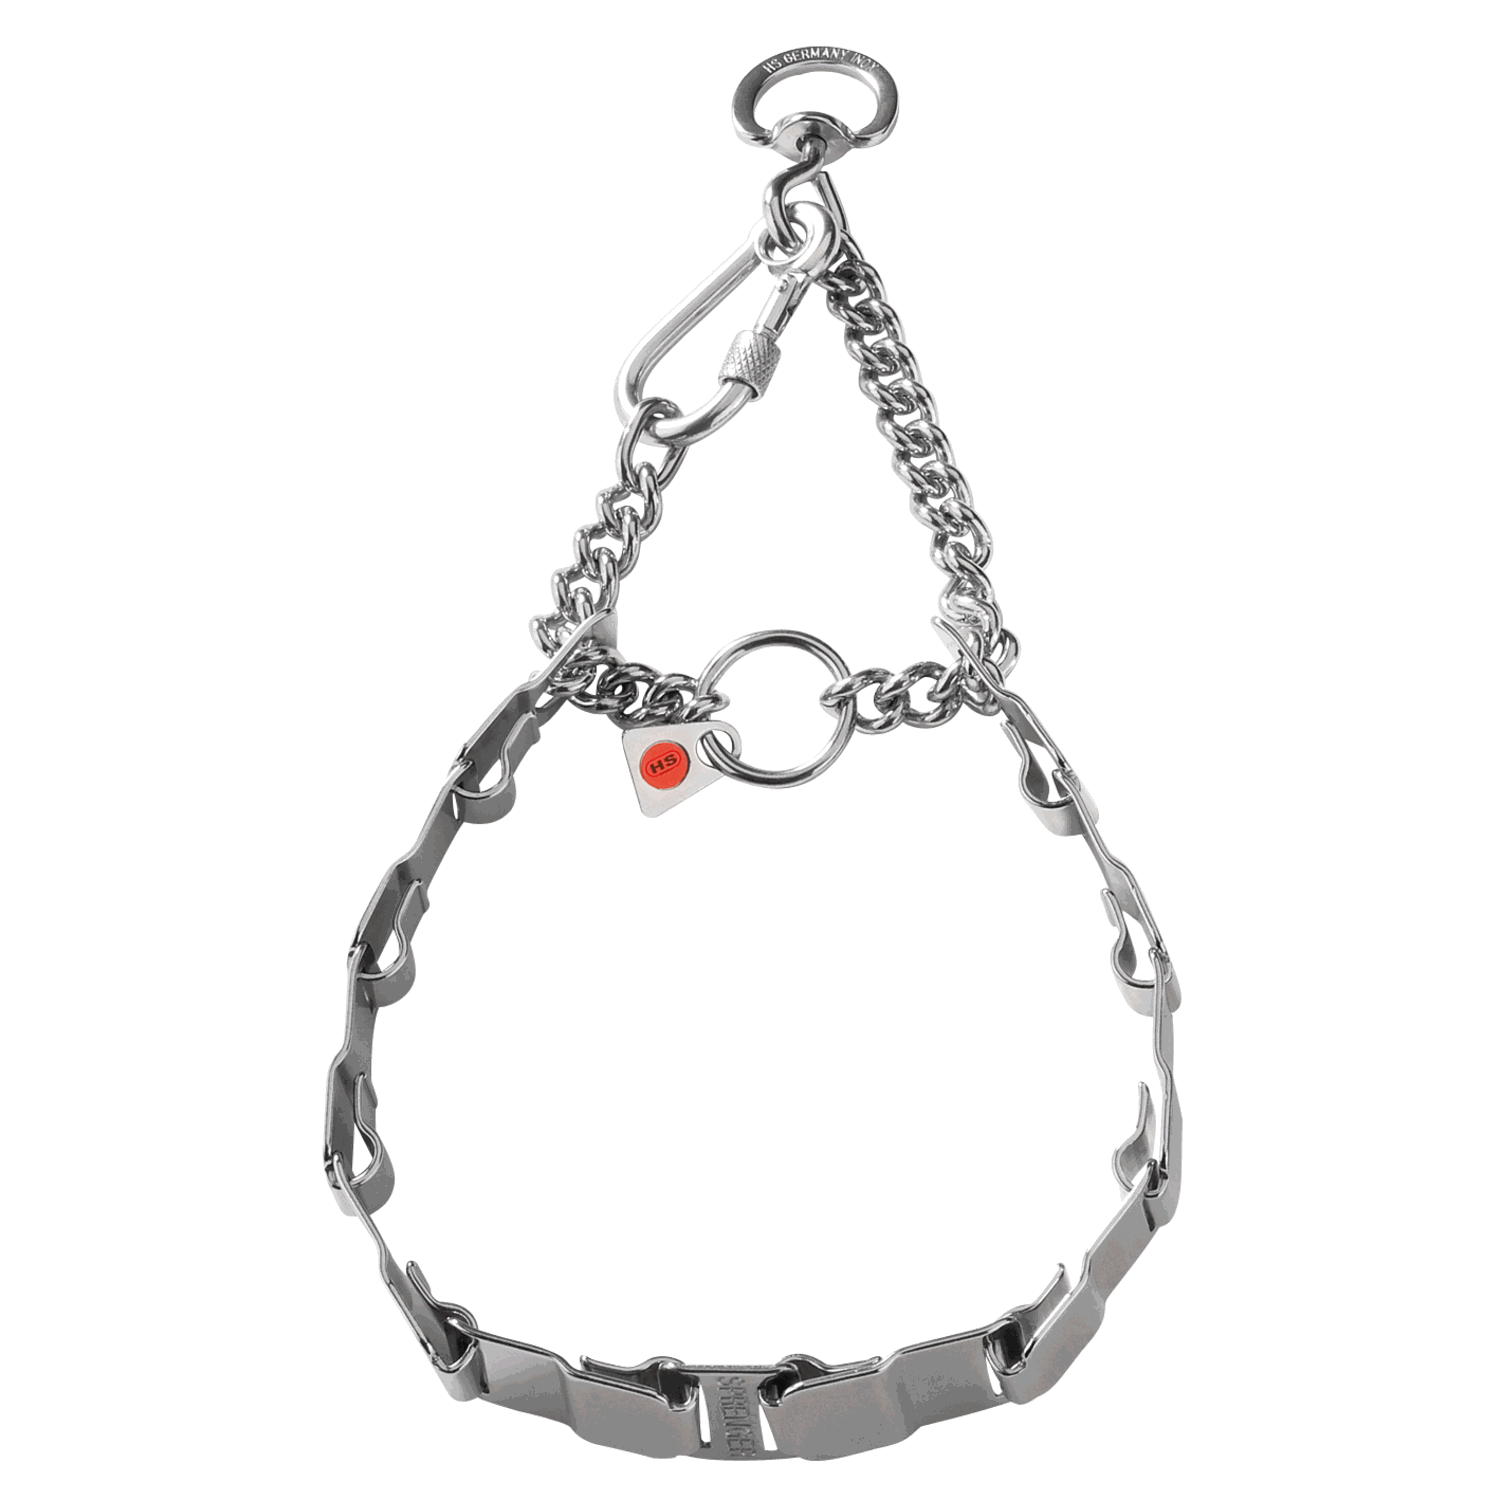 NeckTech Fun Collar with Assembly Chain - Stainless Steel